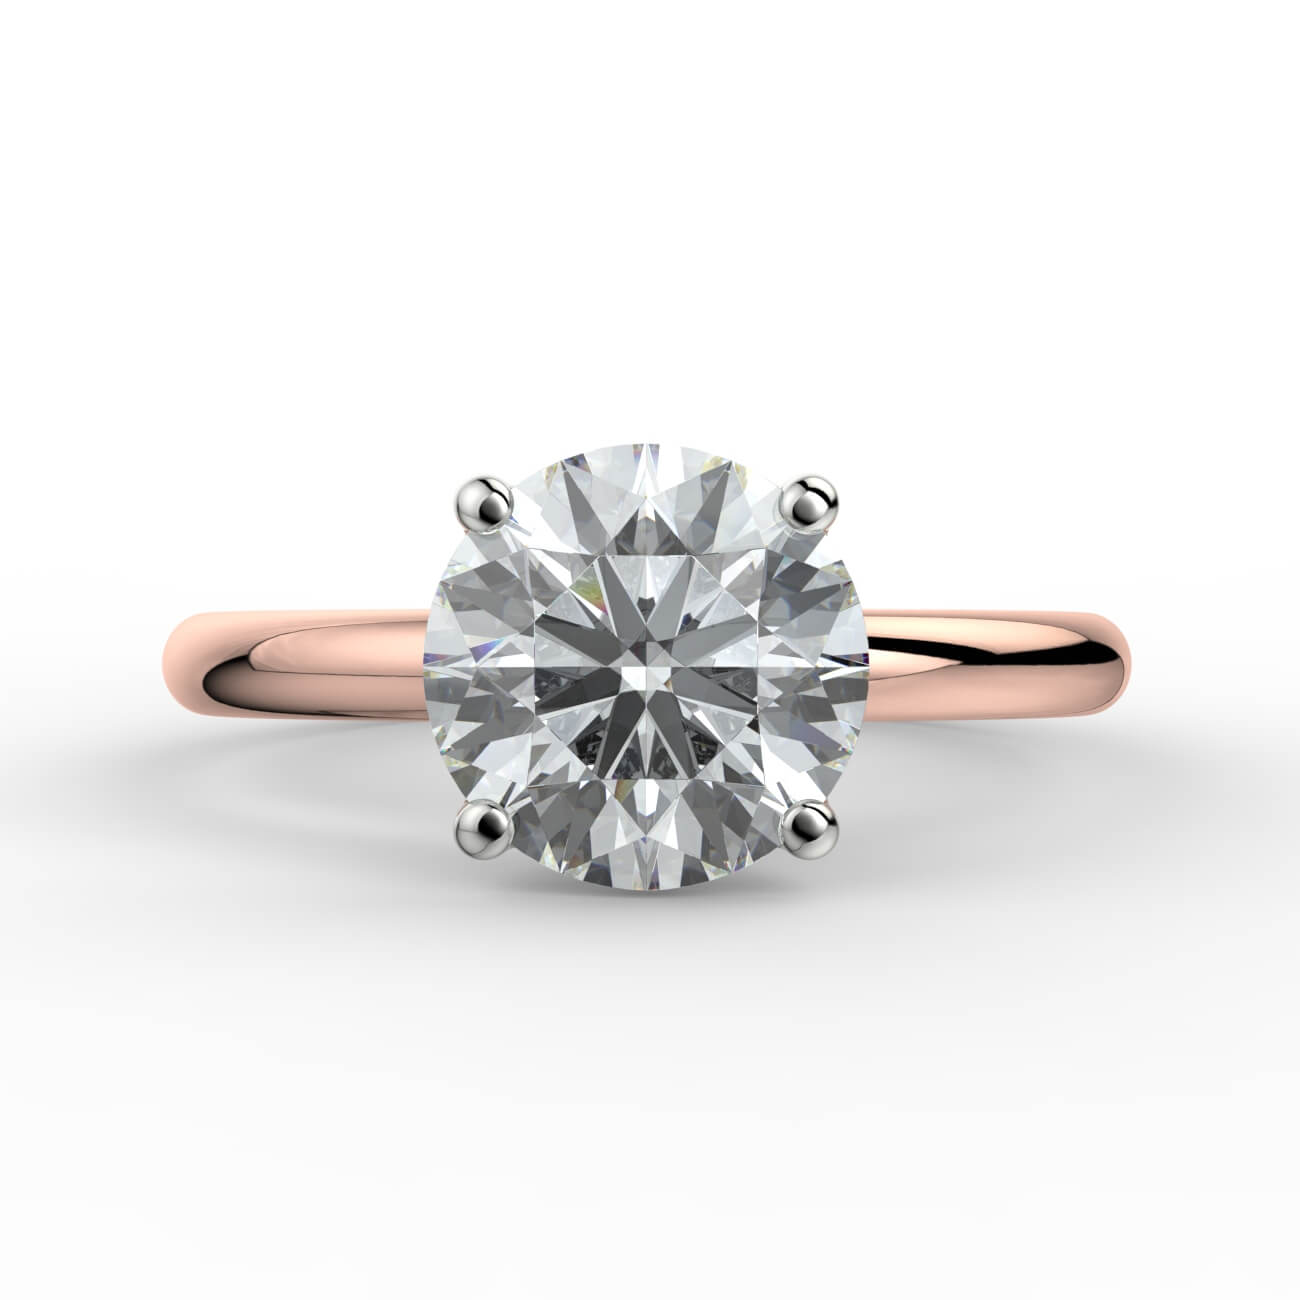 Solitaire diamond engagement ring in yellow and rose gold – Australian Diamond Network